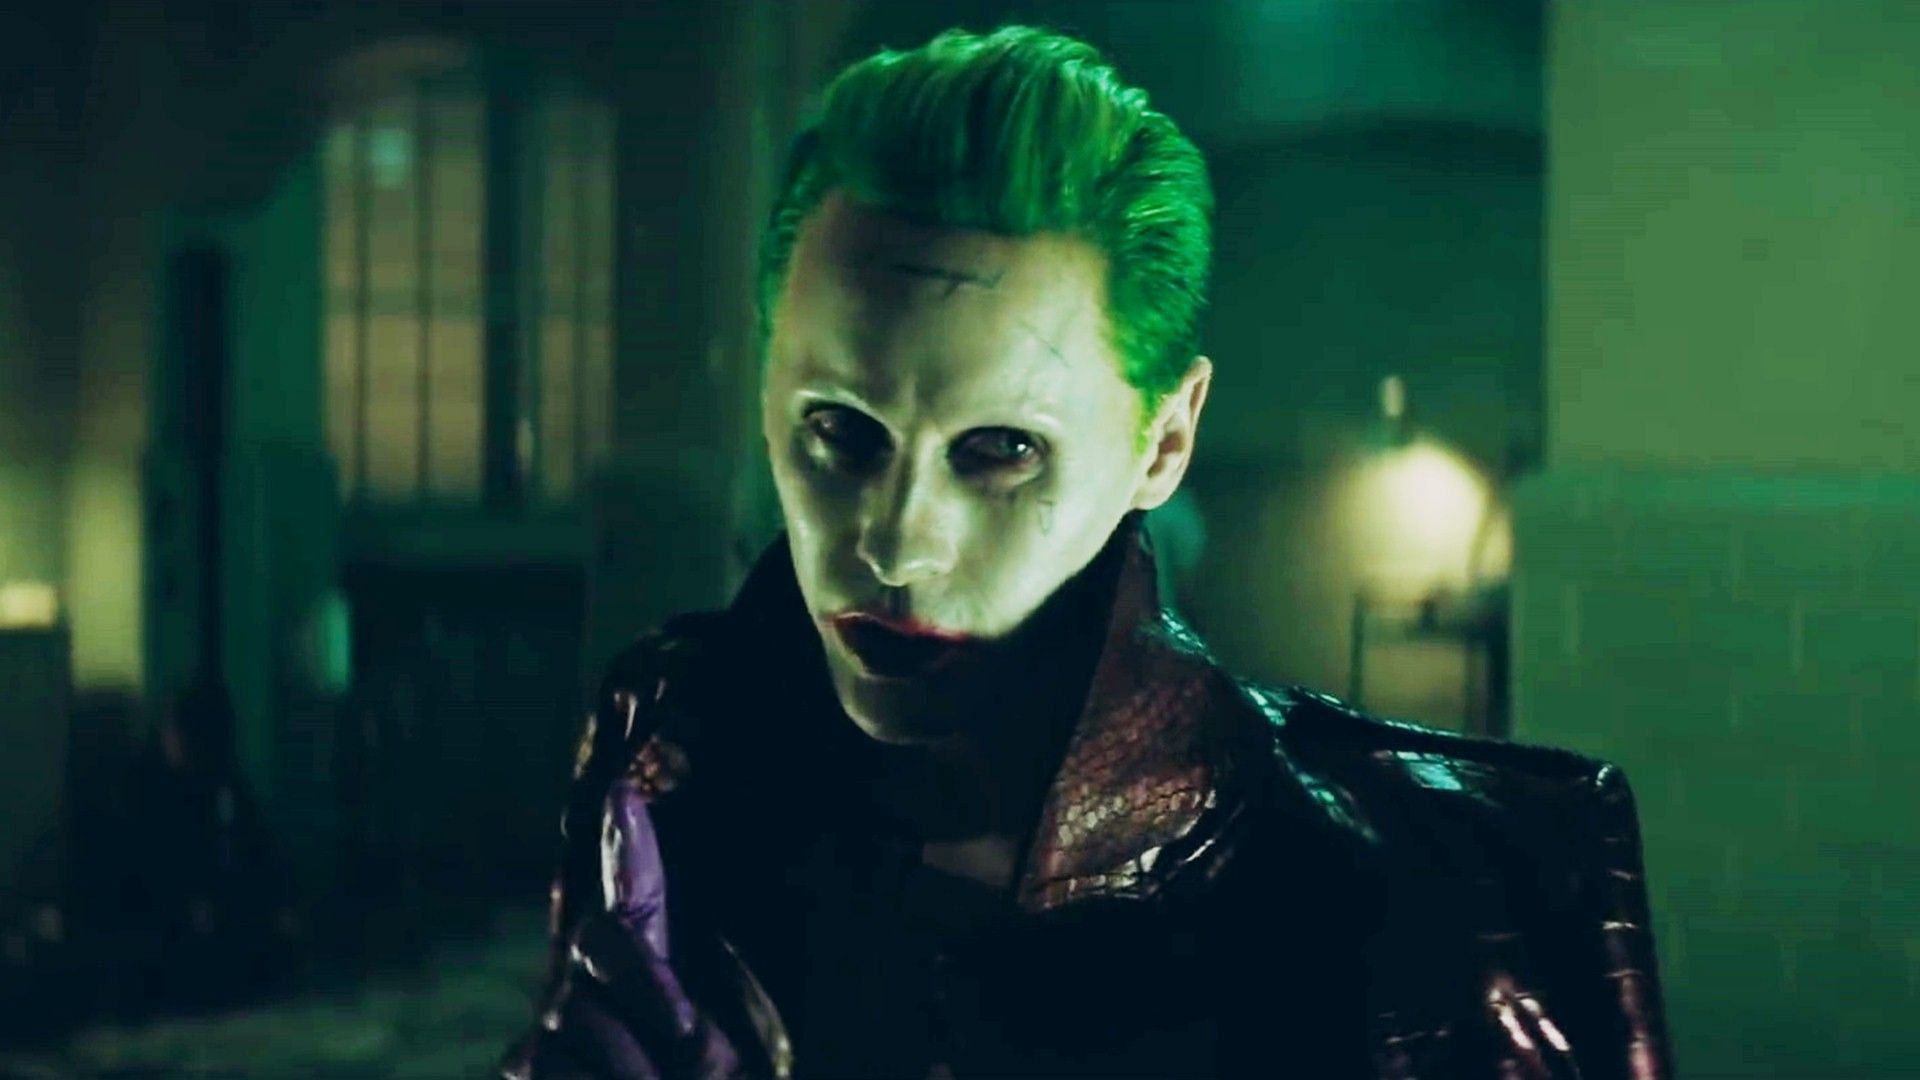 Leto&#039;s Joker actor was unpredictable and unsettling, with a twisted sense of humor. (Image Via DC) (Image via DC)